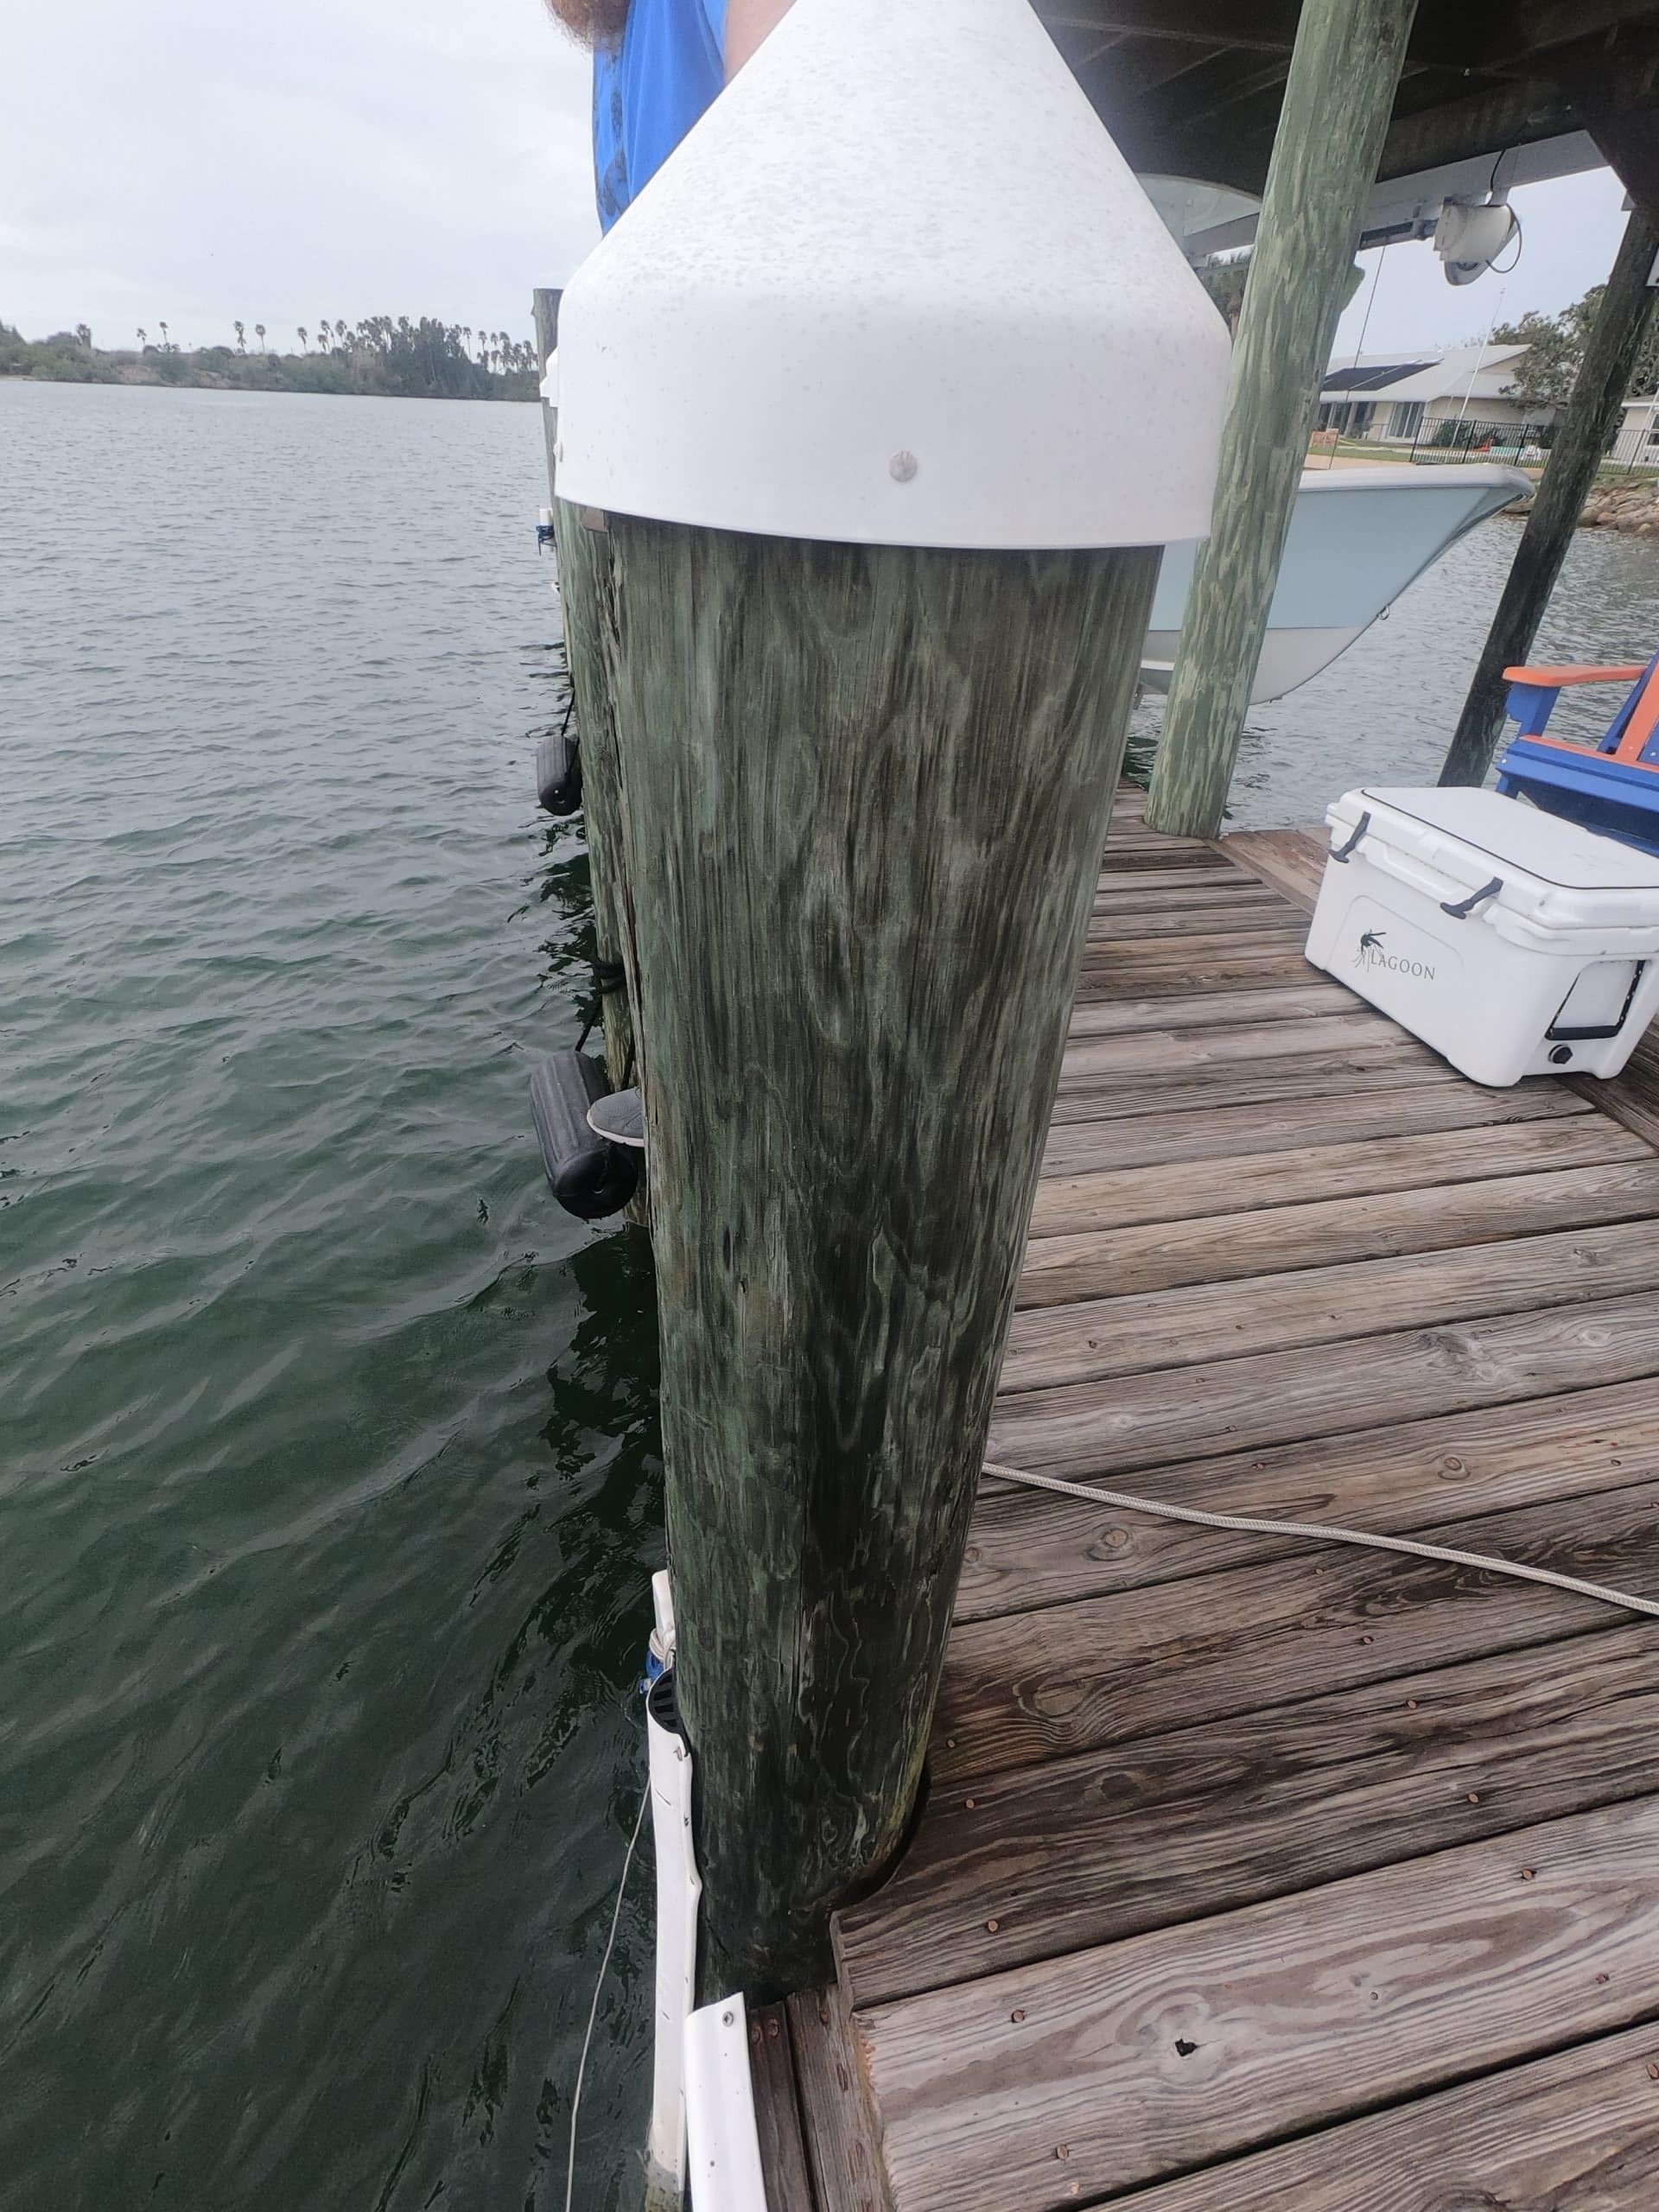 https://southernboating.com/wp-content/uploads/2023/06/From-the-surface-pilings-can-appear-new.-This-piling-had-major-damage-that-was-covered-by-an-oyster-cluster-below-the-surface.--scaled-e1686069537632.jpg